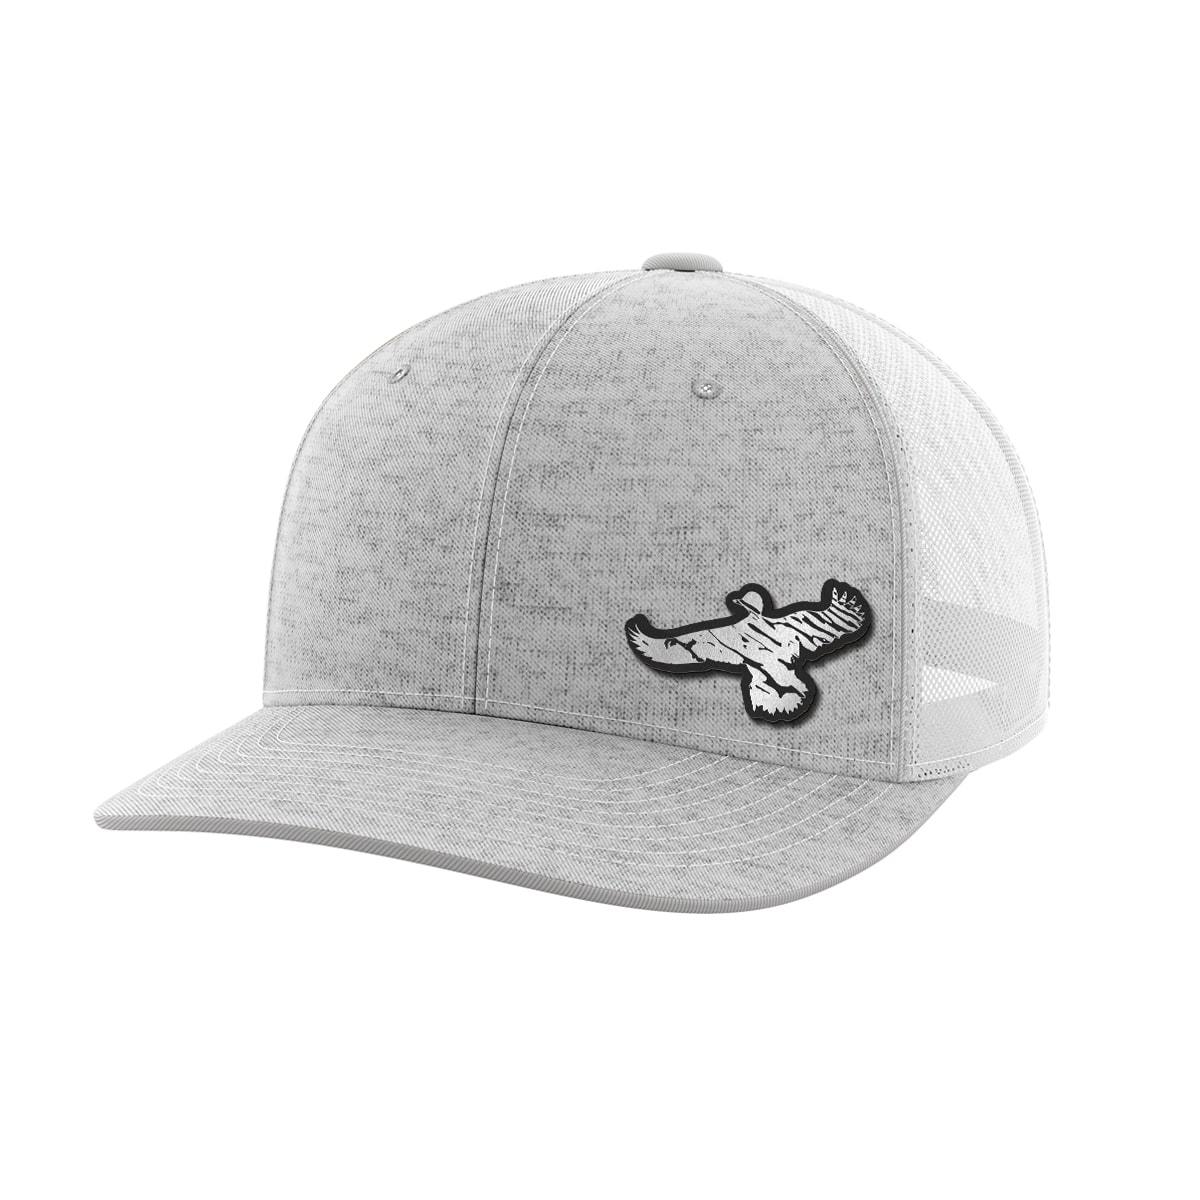 Duck Black Patch Hat - Greater Half